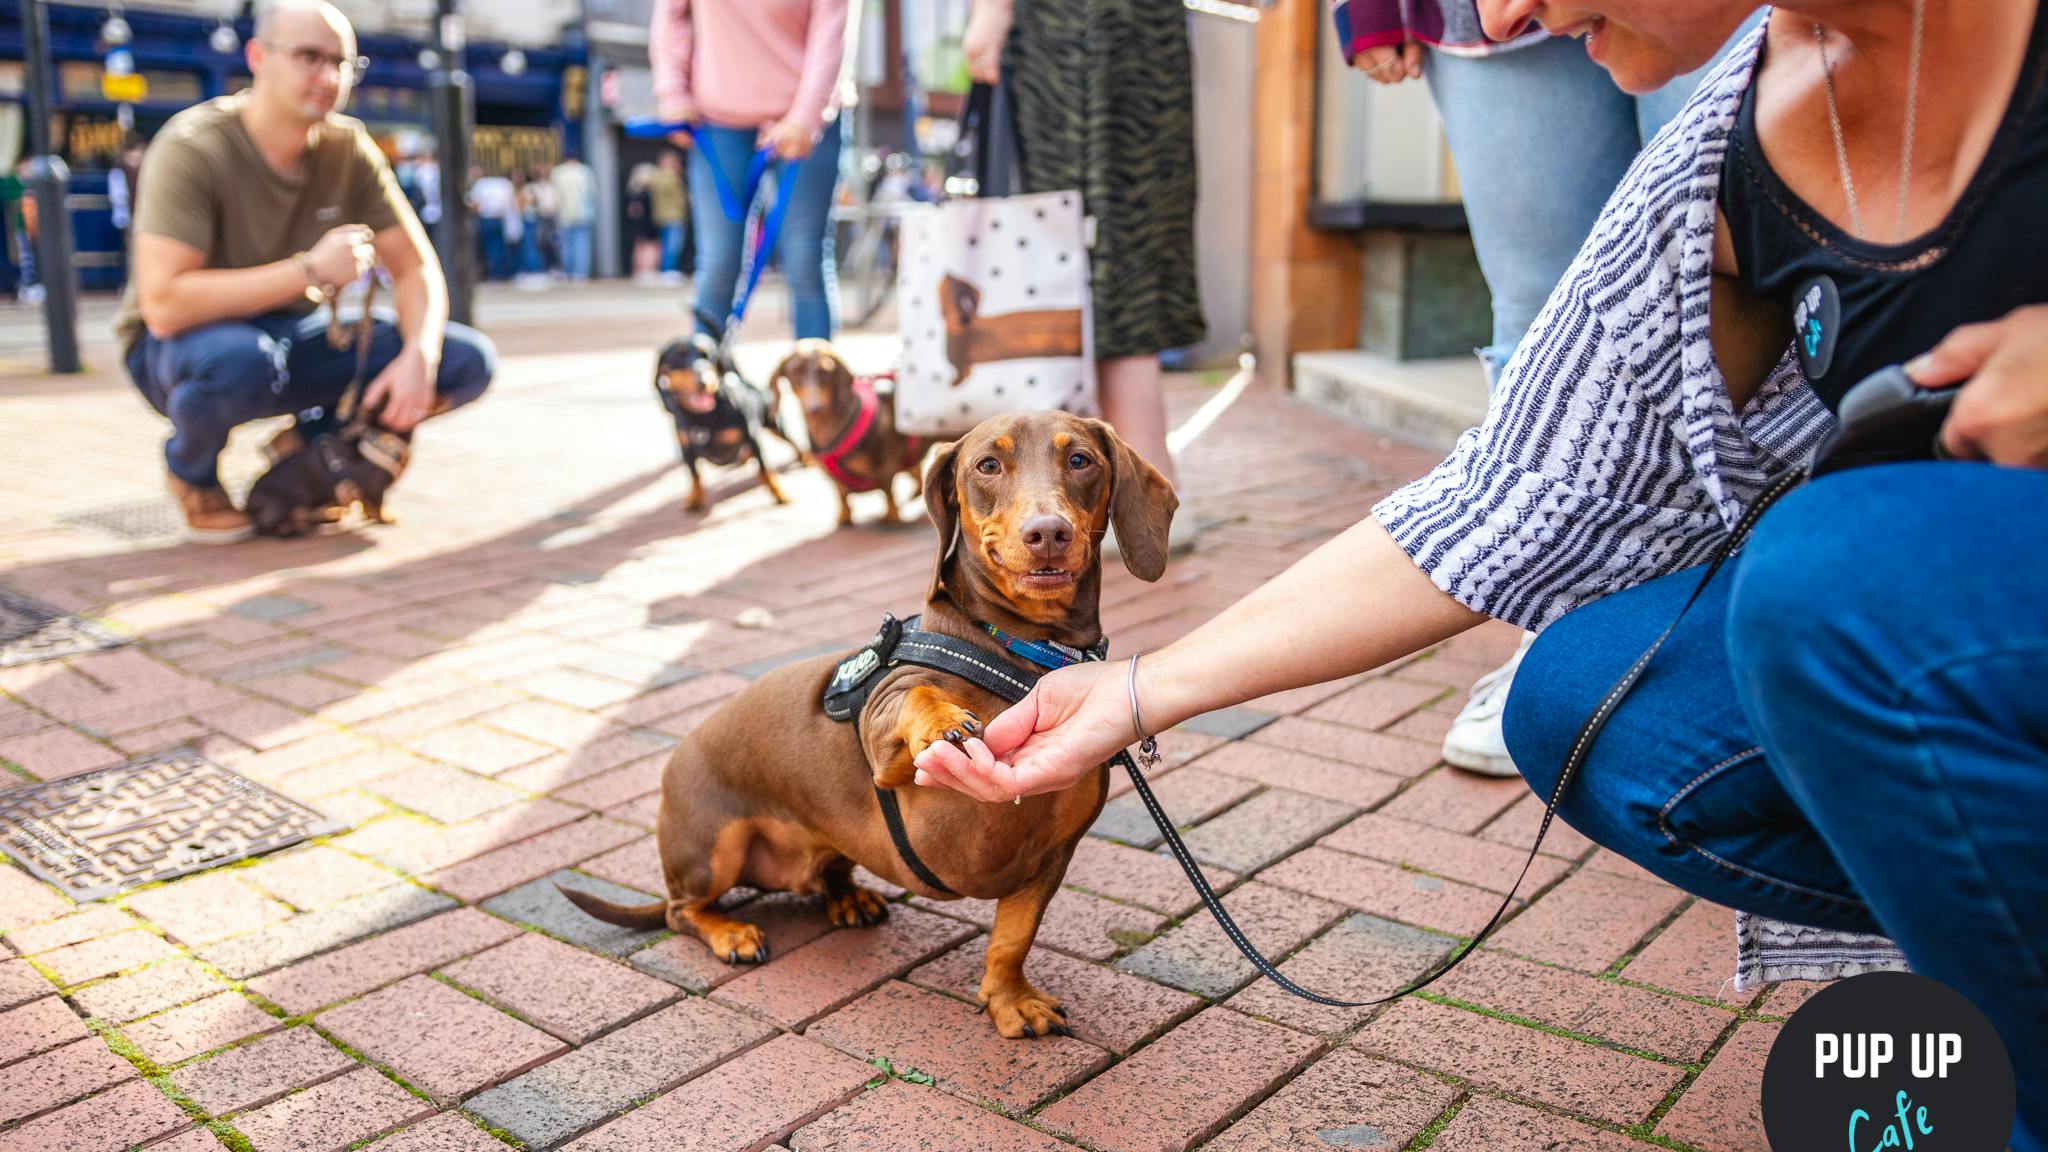 Pup Up Cafe™ brings 300+ Dachshunds to Glasgow bar!